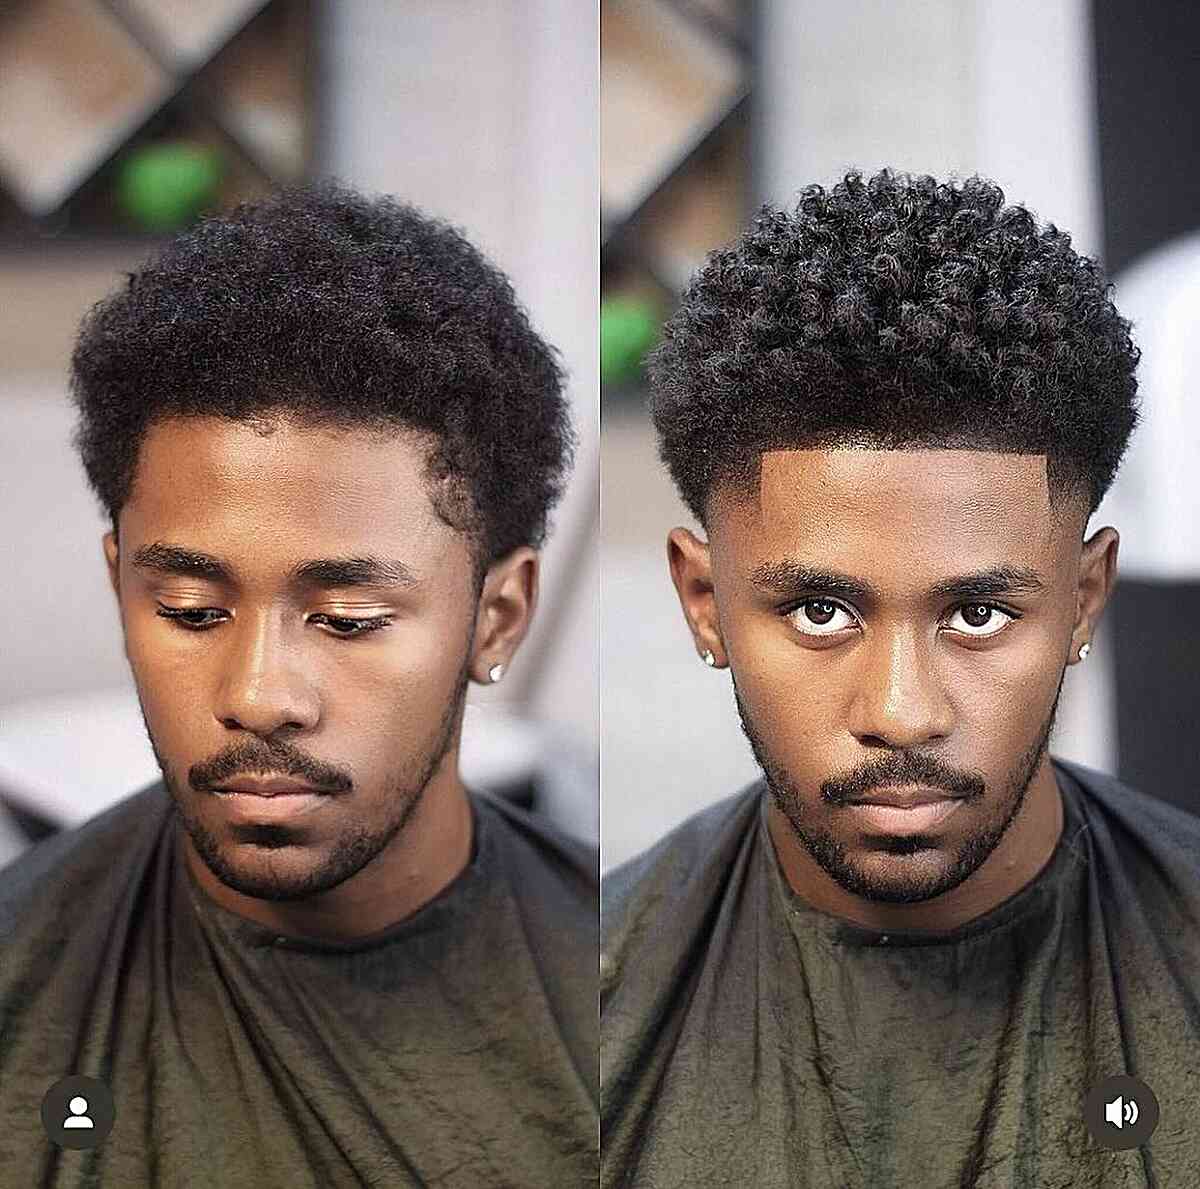 Fresh Line Up with an Afro for Black Dudes